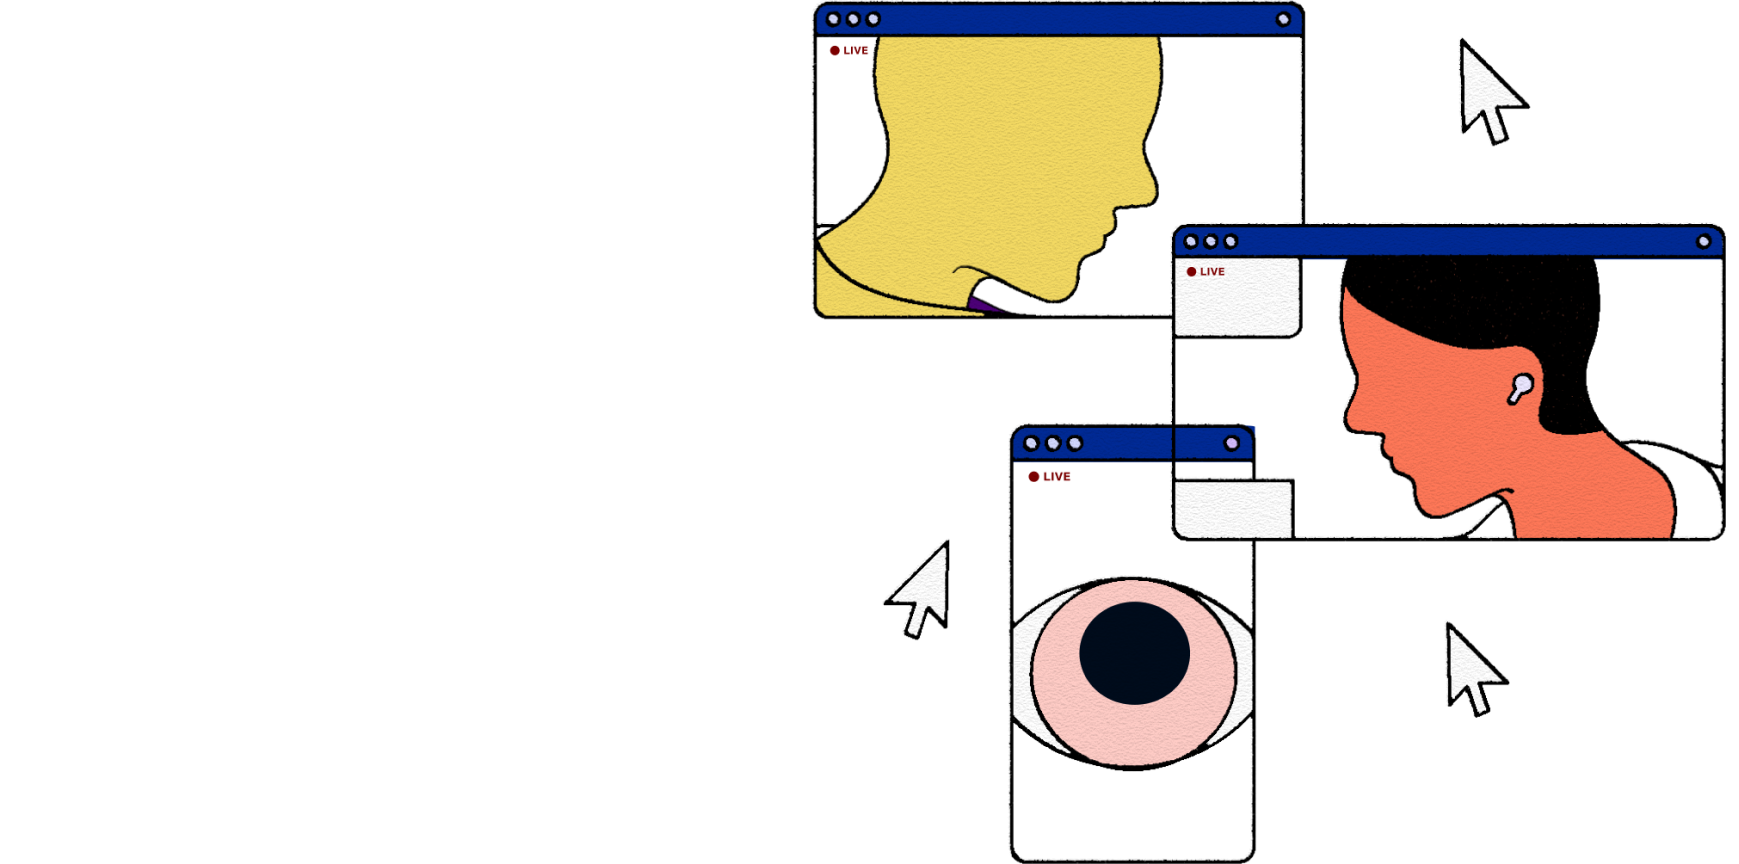 image depicting a virtual meeting, showing people in